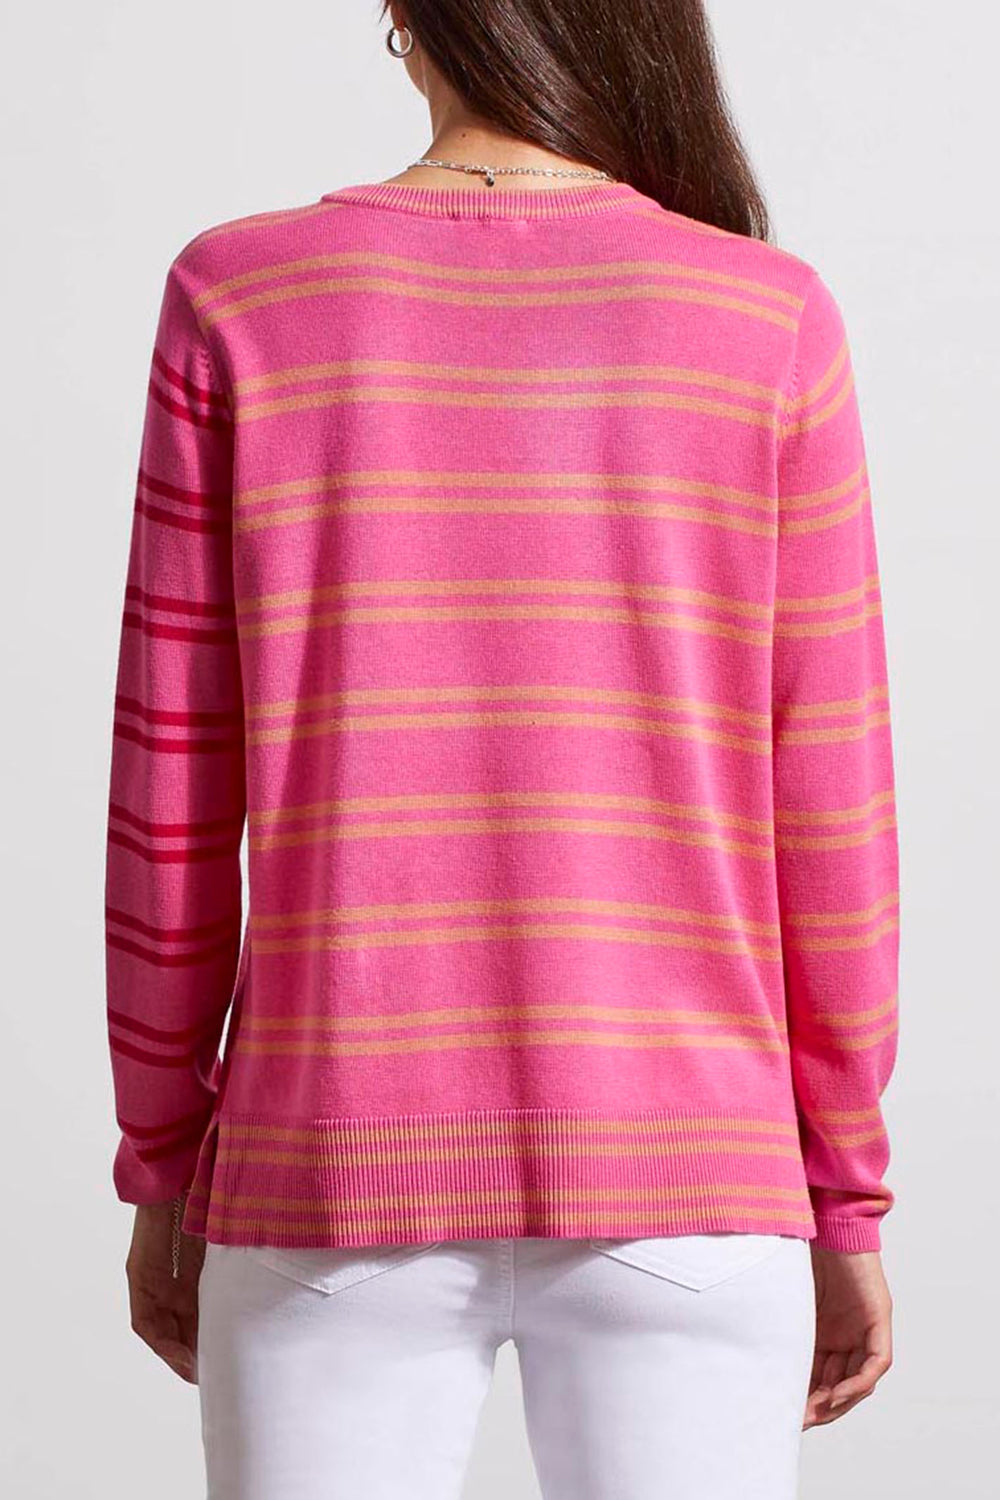 Tribal 54820 Hot Pink Floral Stripe Mesh Knit Jumper - Experience Boutique